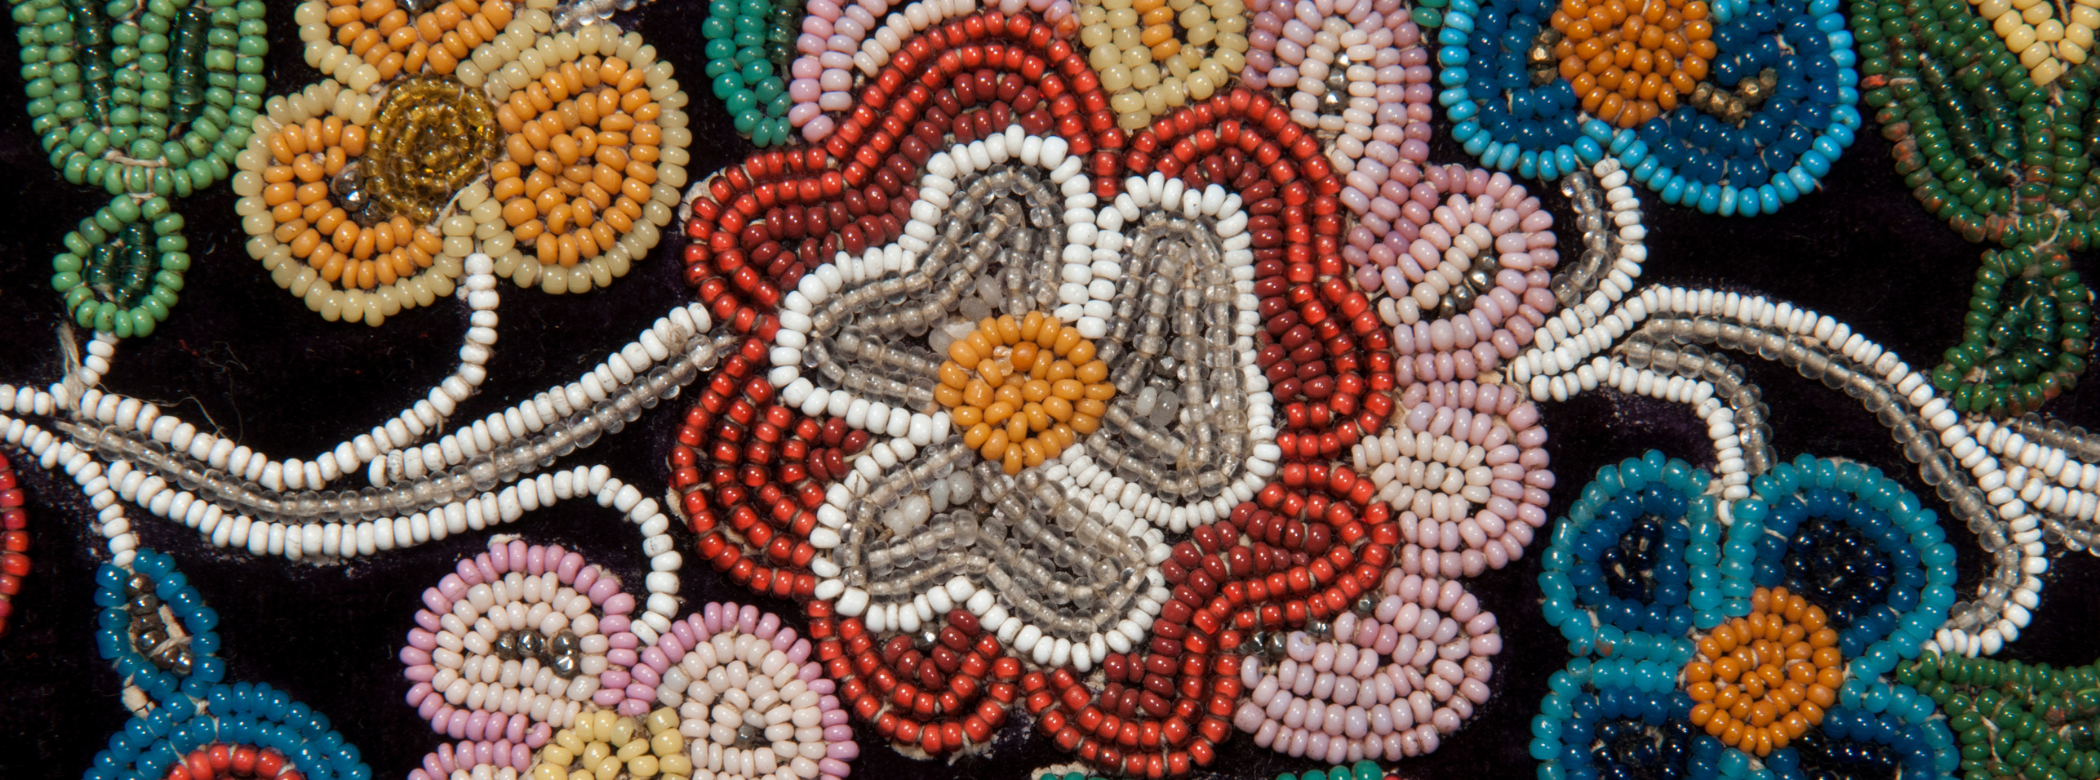 Close-up on a piece of colourful, intricate beadwork on a black background.